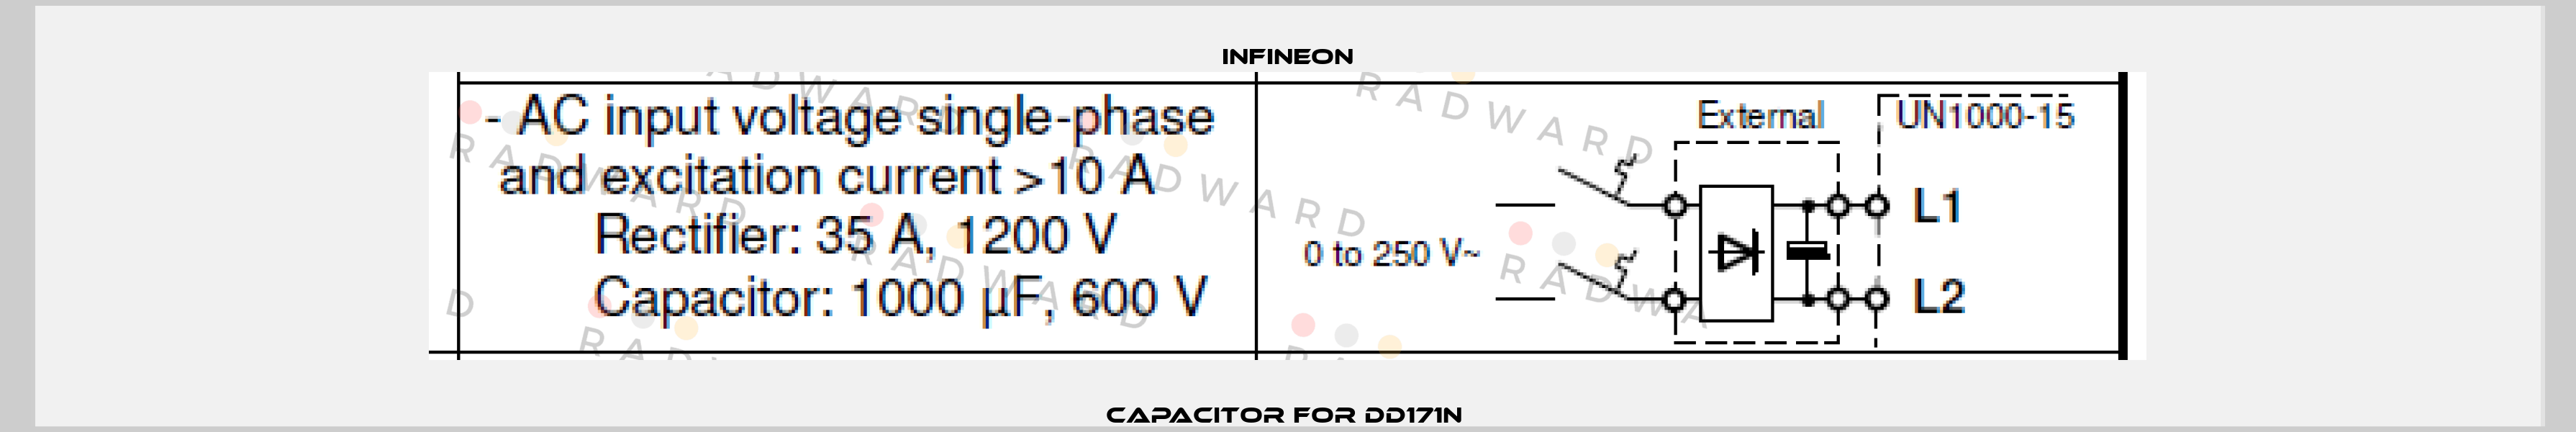 Capacitor For DD171N  Infineon